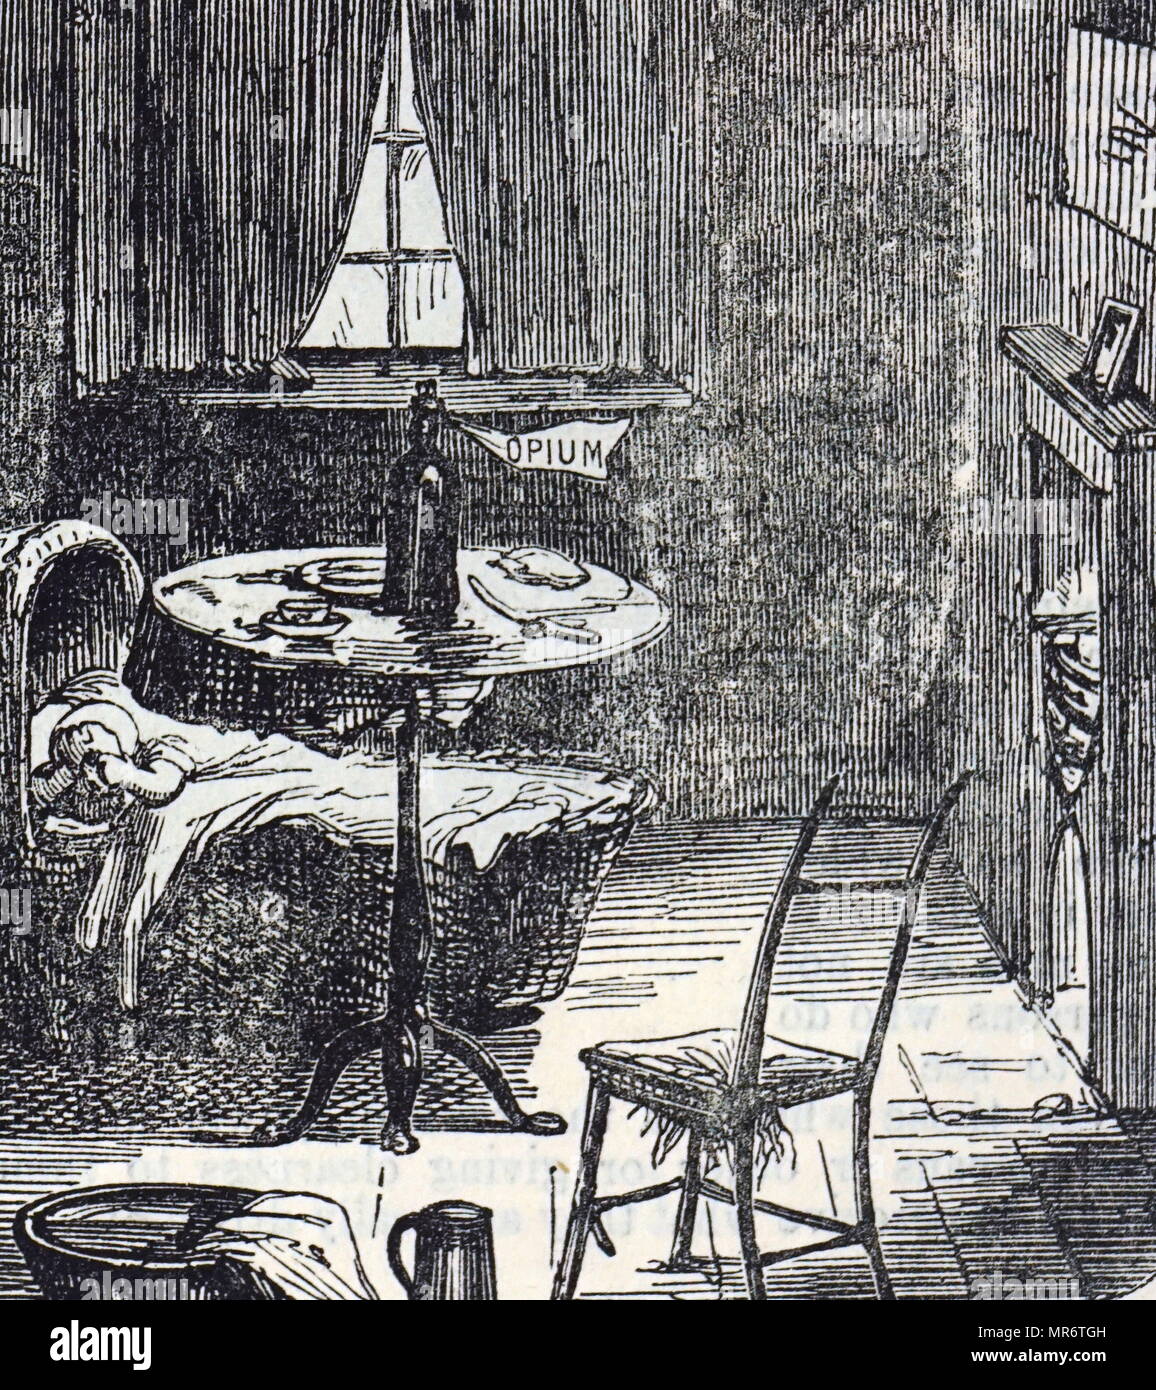 Cartoon commenting on the widespread use of opiates - a sick baby is left alone crying in her crib, whilst her parents are away using opiates. Dated 19th century Stock Photo